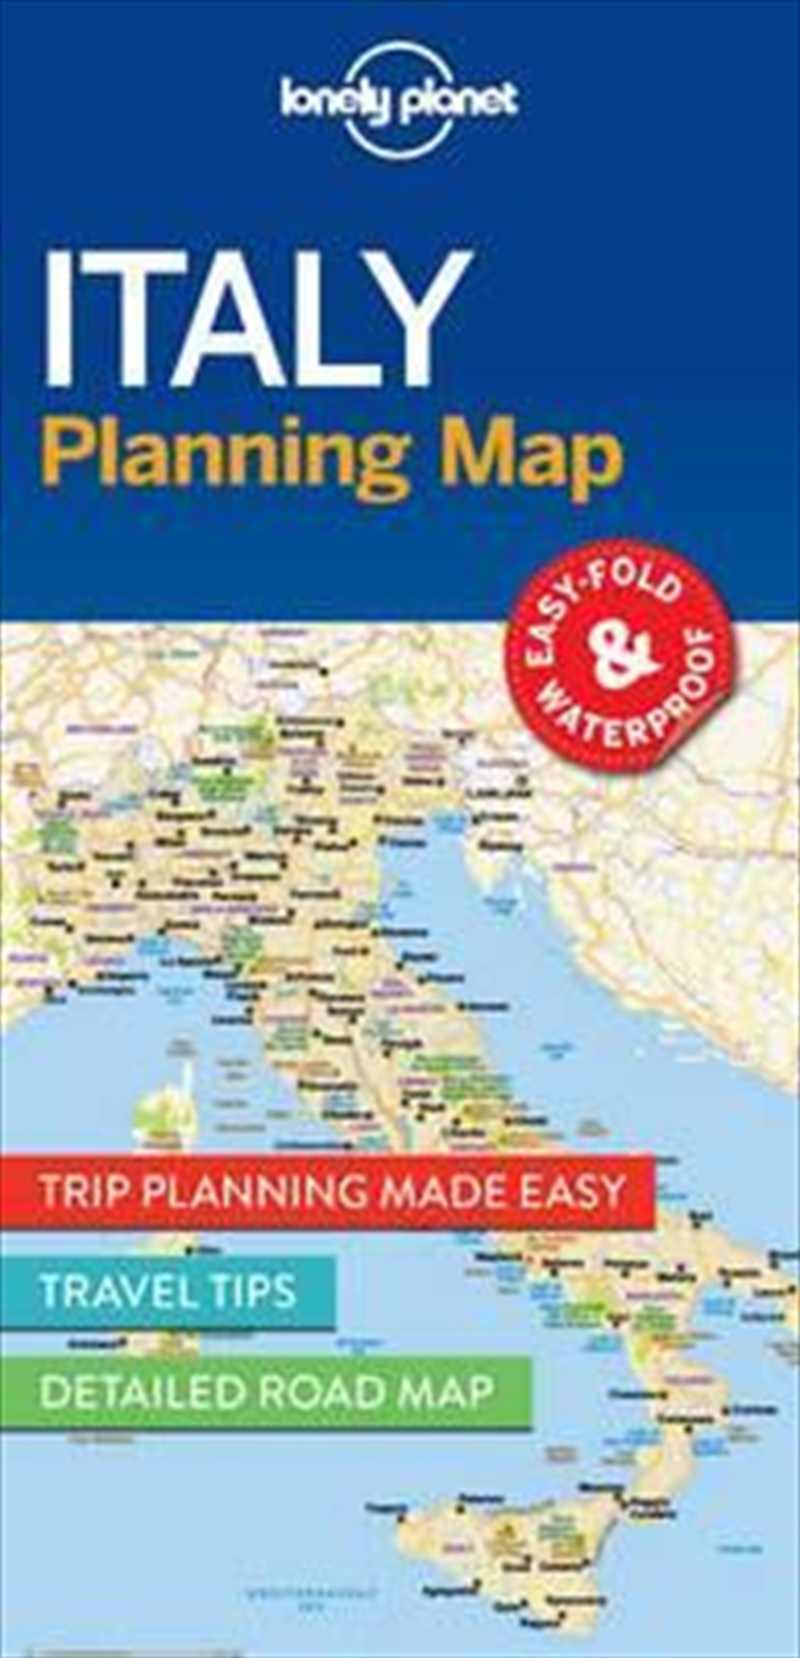 Lonely Planet Italy Planning Map/Product Detail/Travel & Holidays